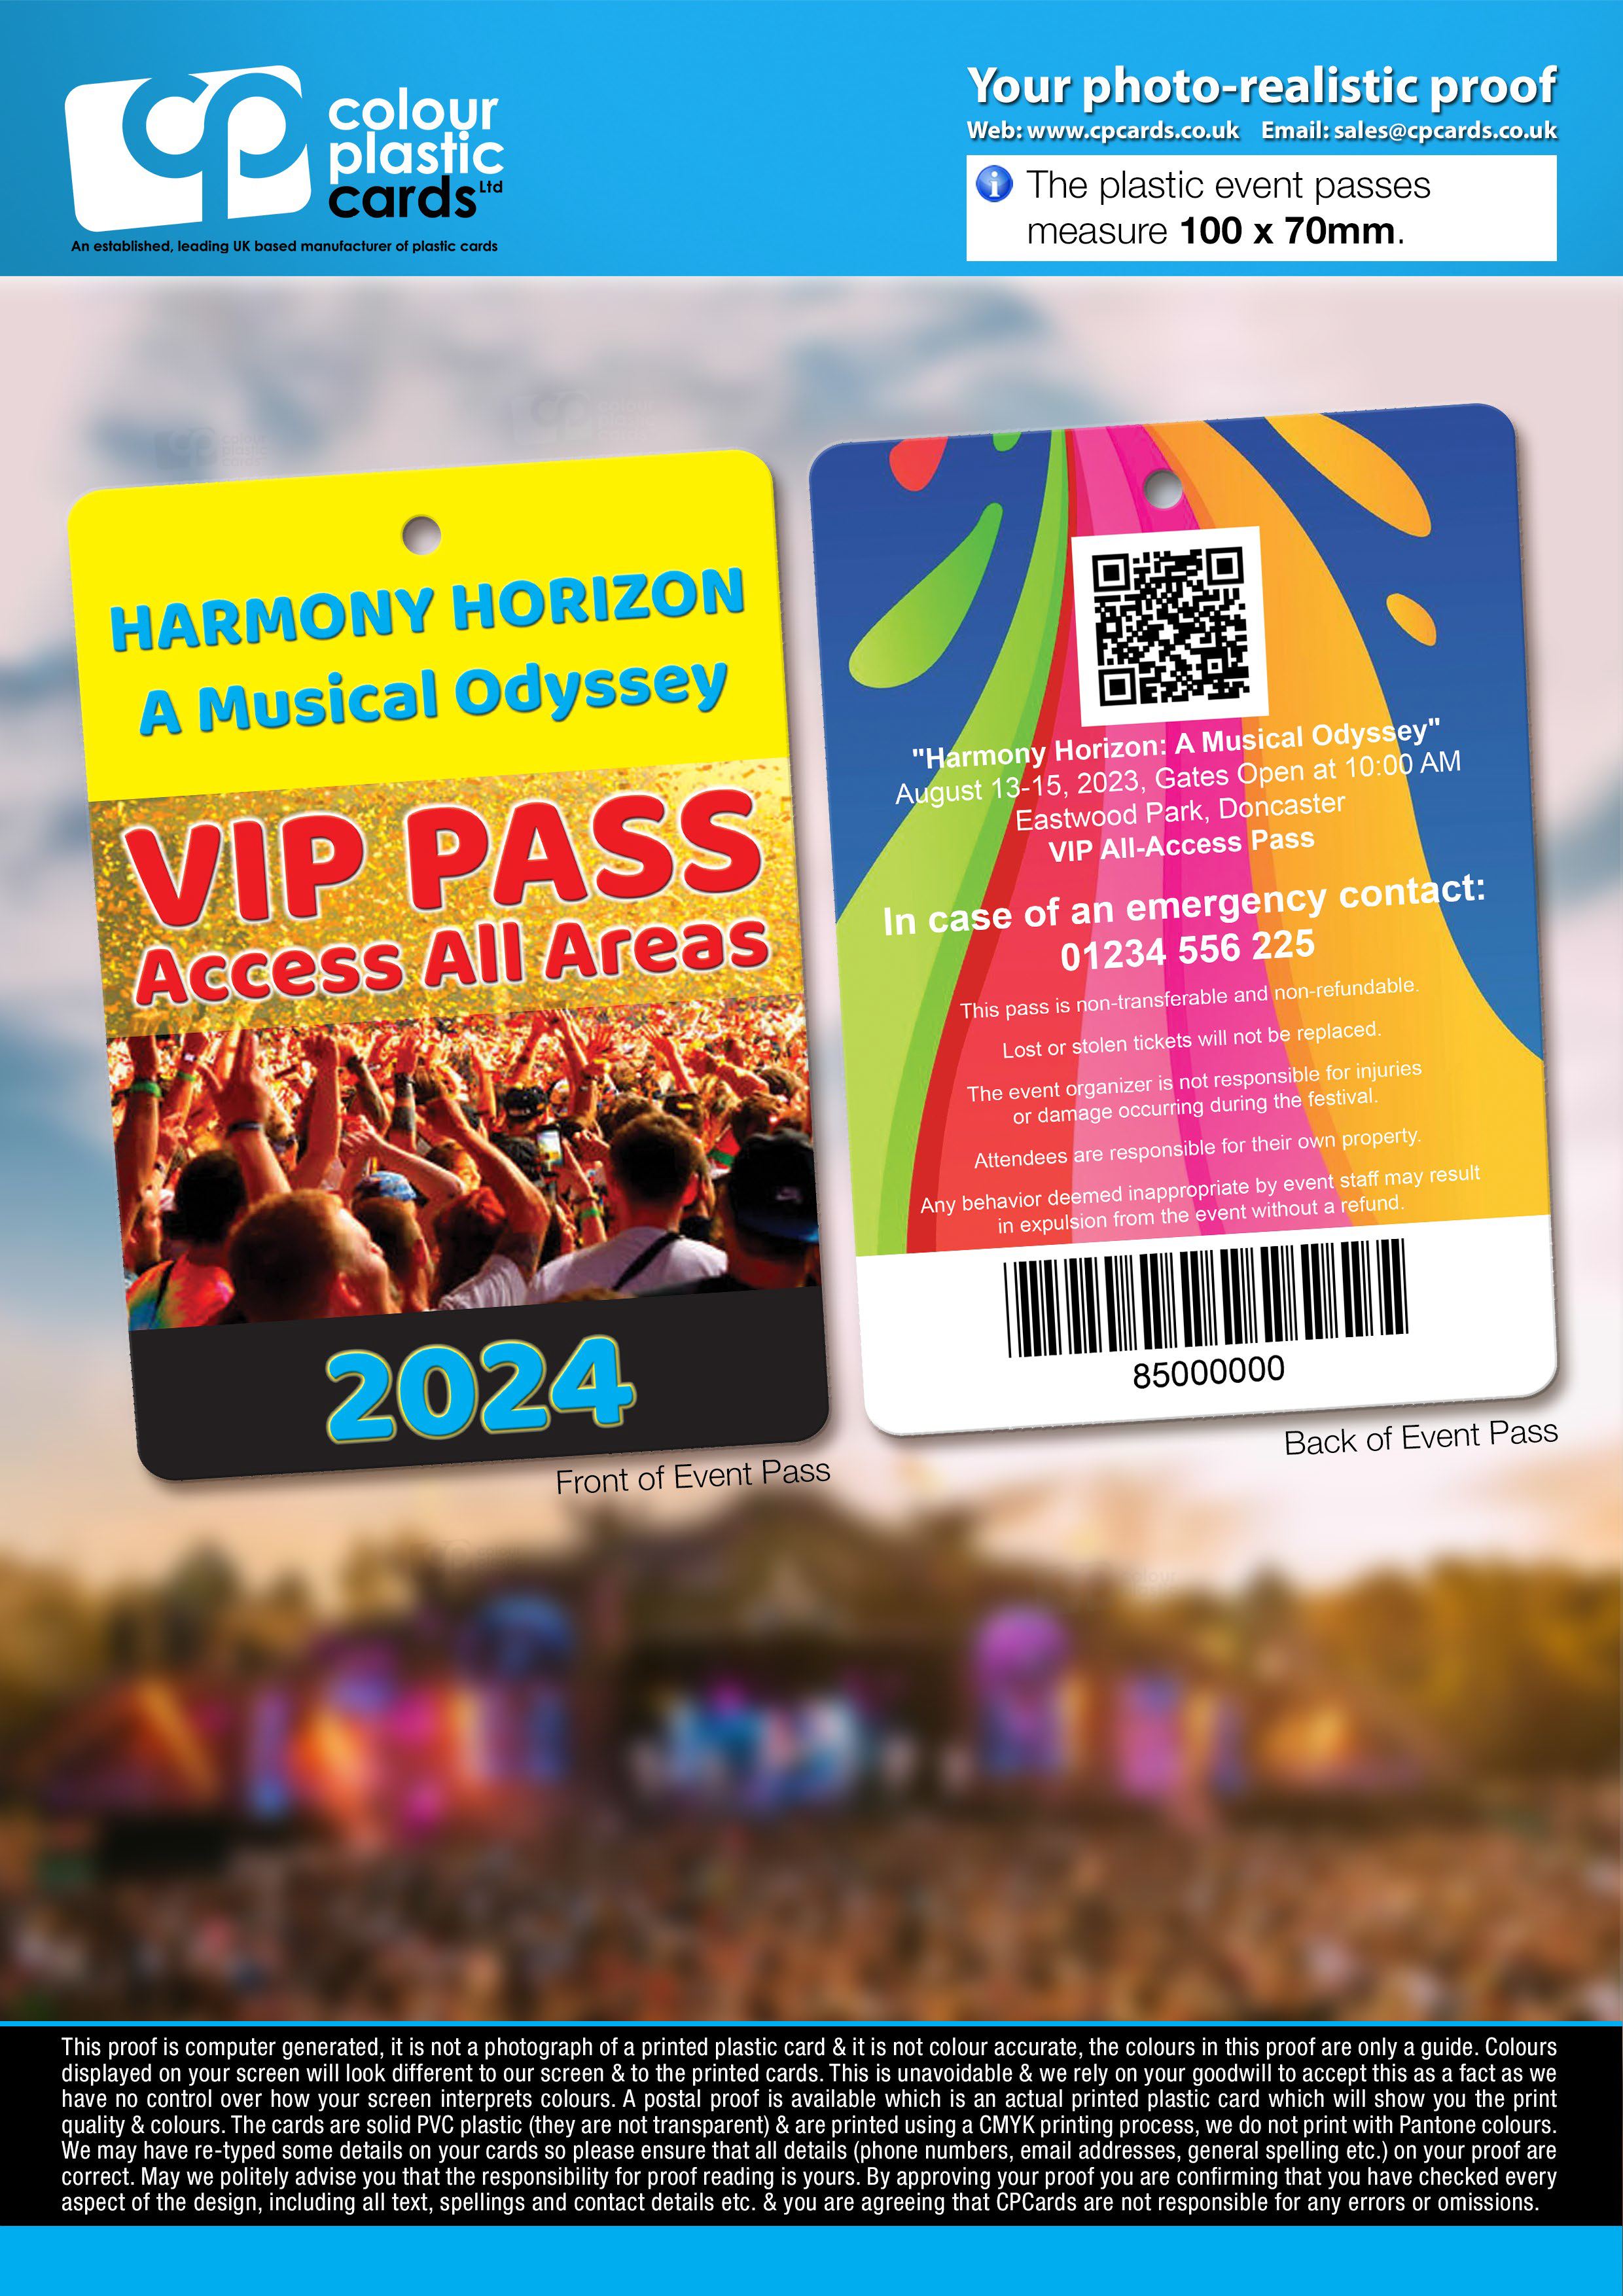 a photo-realistic email proof of an event pass